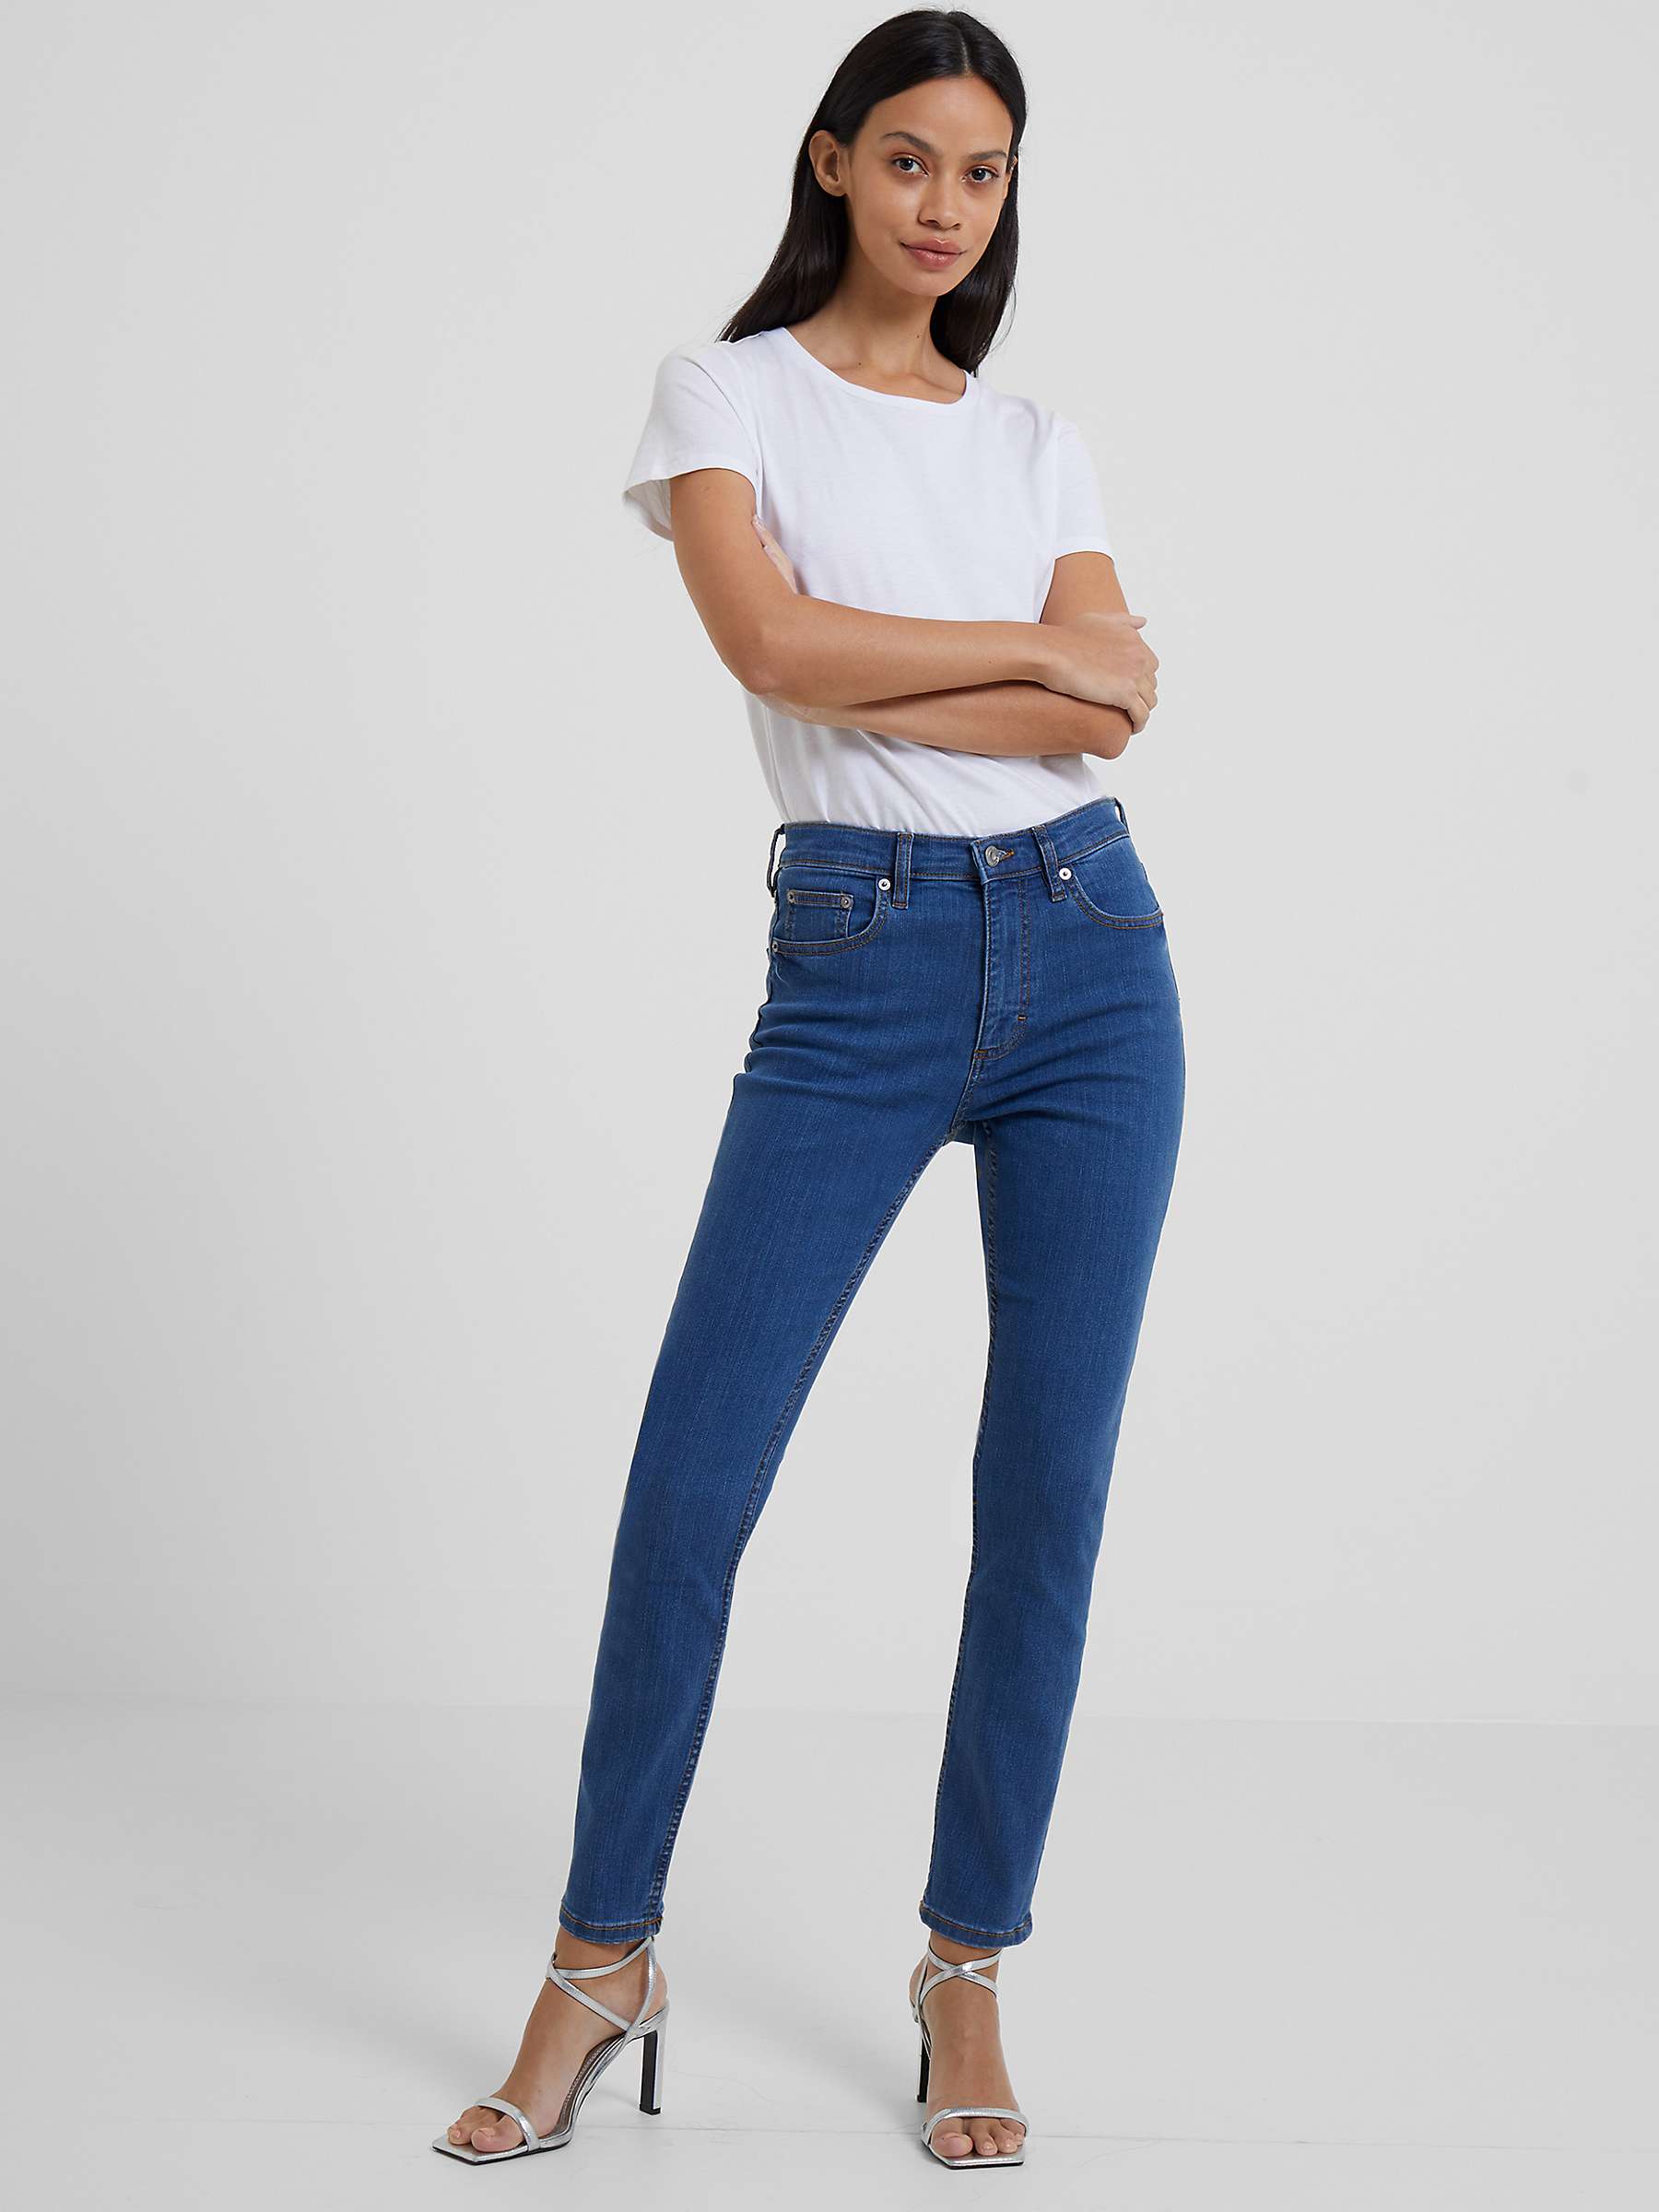 Buy French Connection Rebound Response Jeans, Mid Wash Online at johnlewis.com